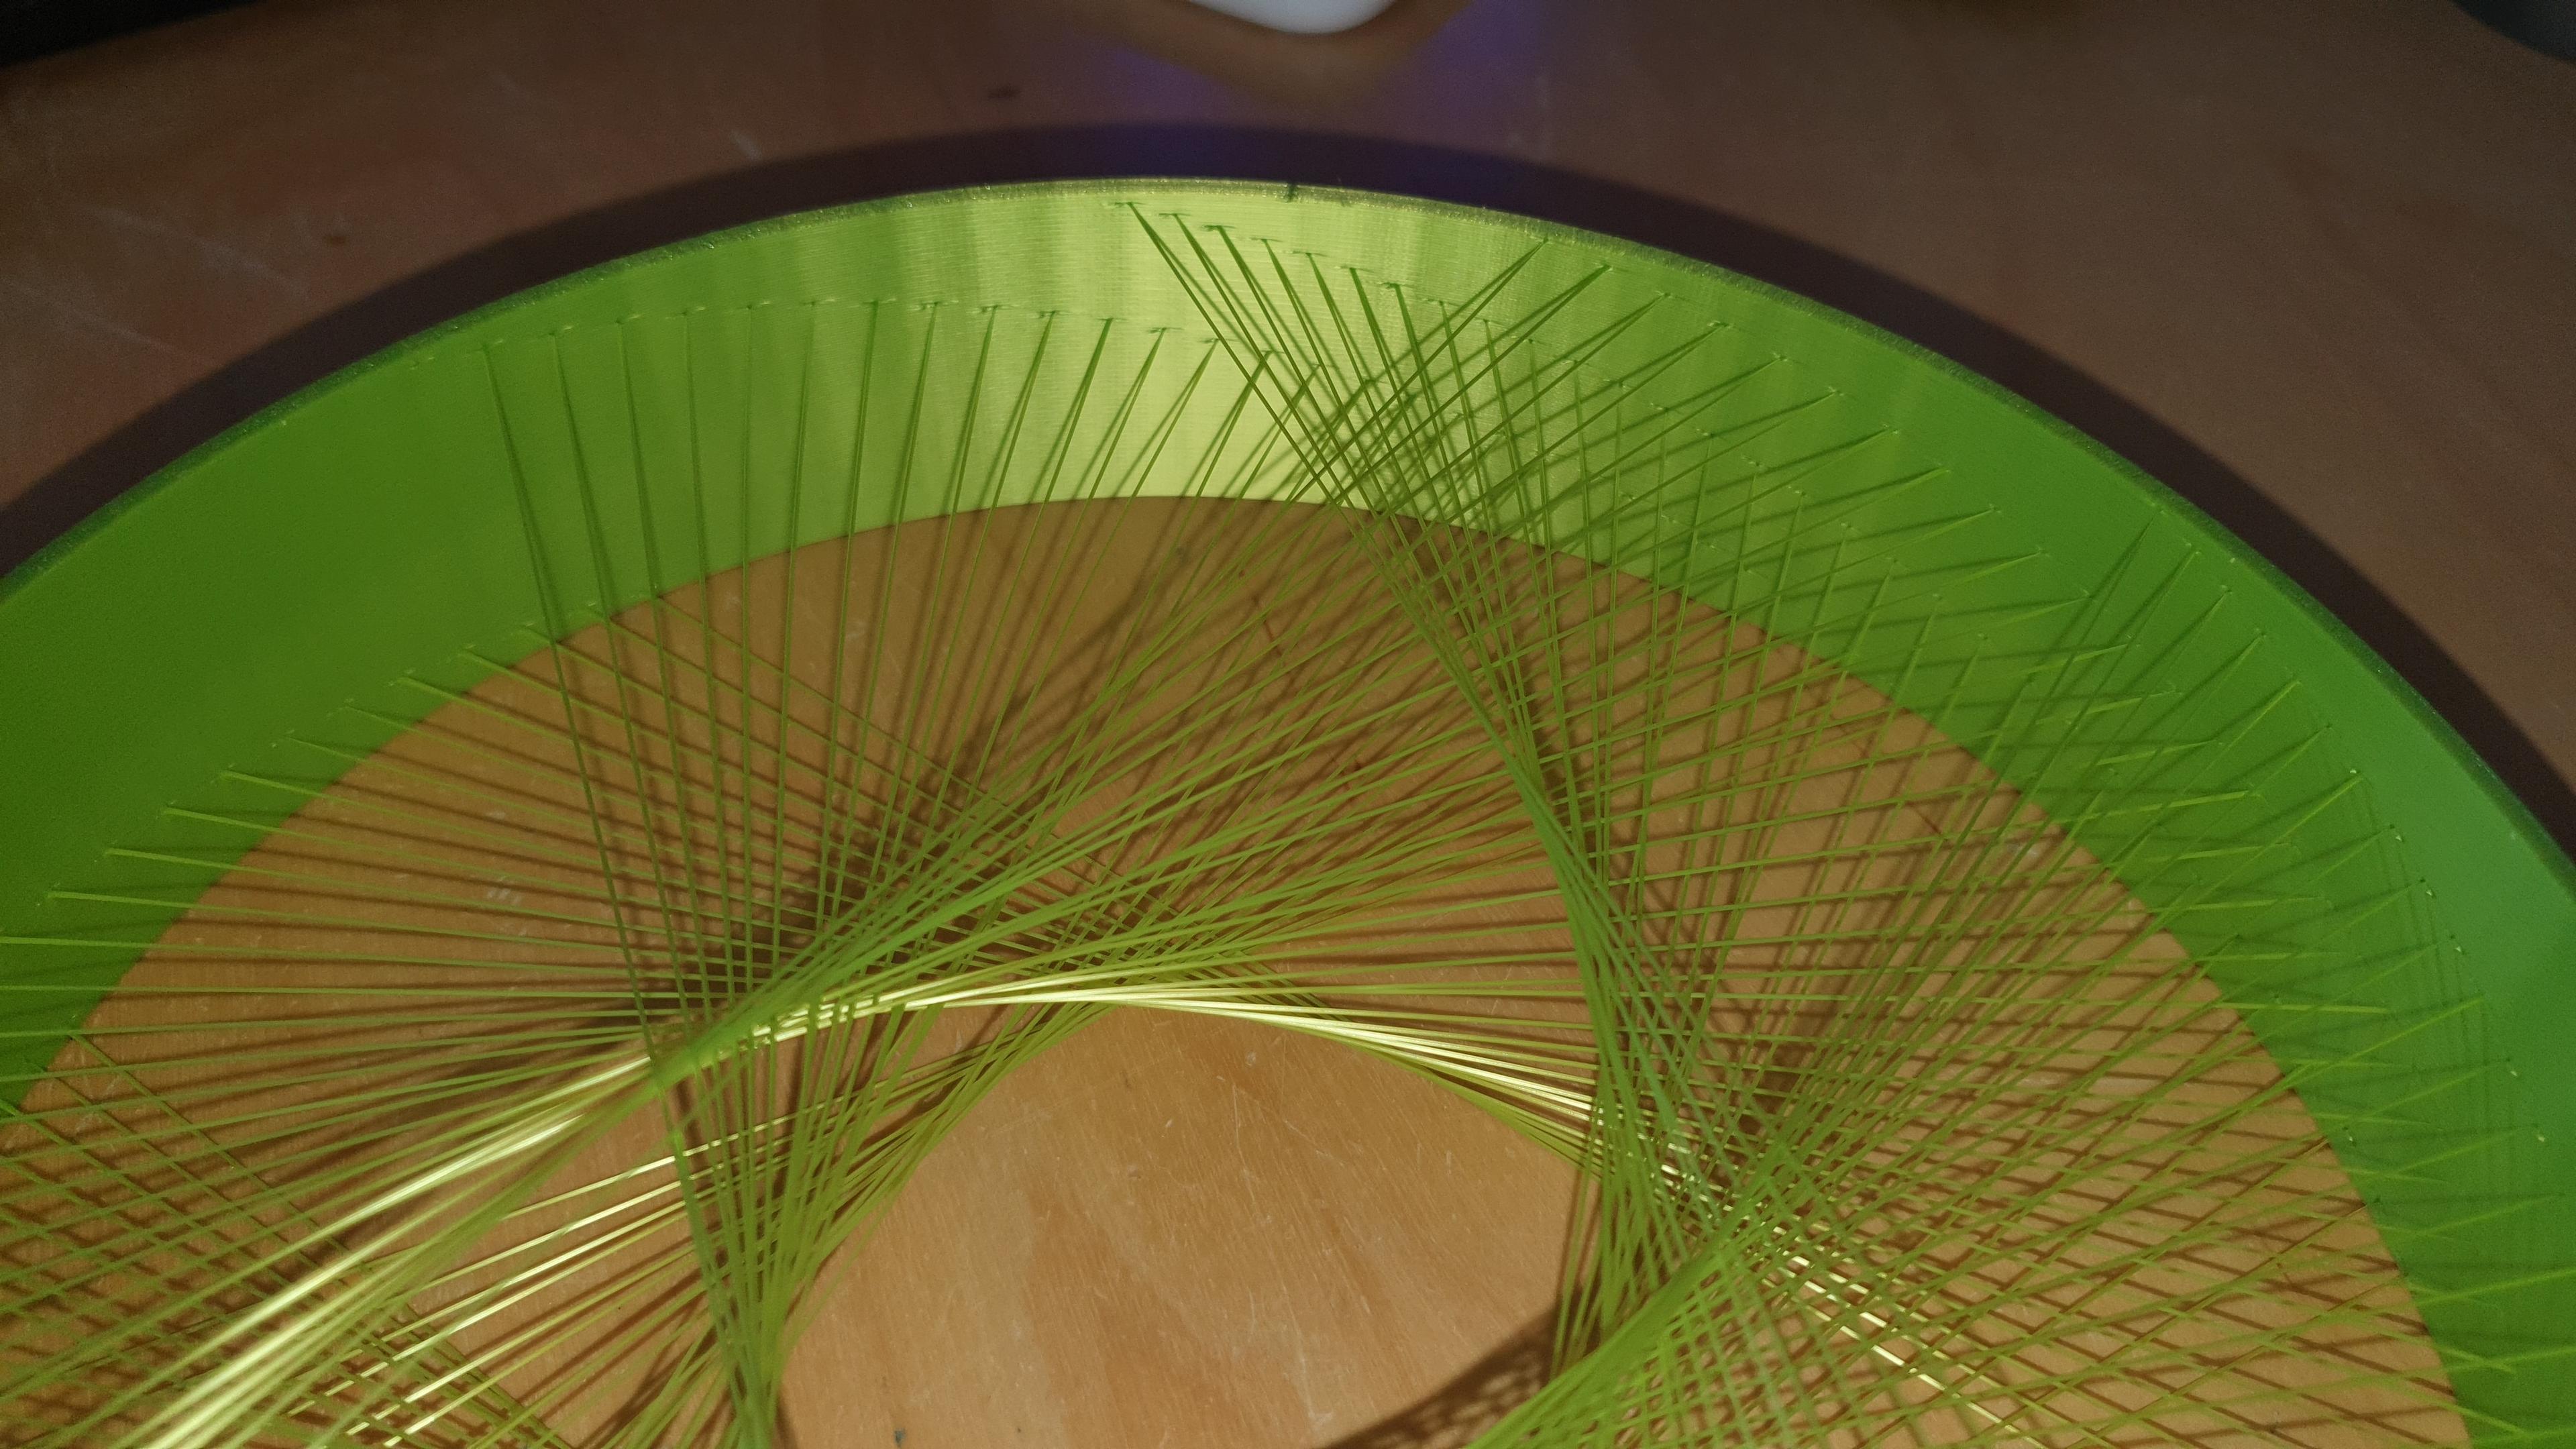 Circle String Art - Thanks for this model. First I saw it, I can´t believe that it works first! Fire up my Prusa, follow your hints and... except two little quirks it prints totally flawless. Using Prusament PLA. Will try next with PETG :-) - 3d model